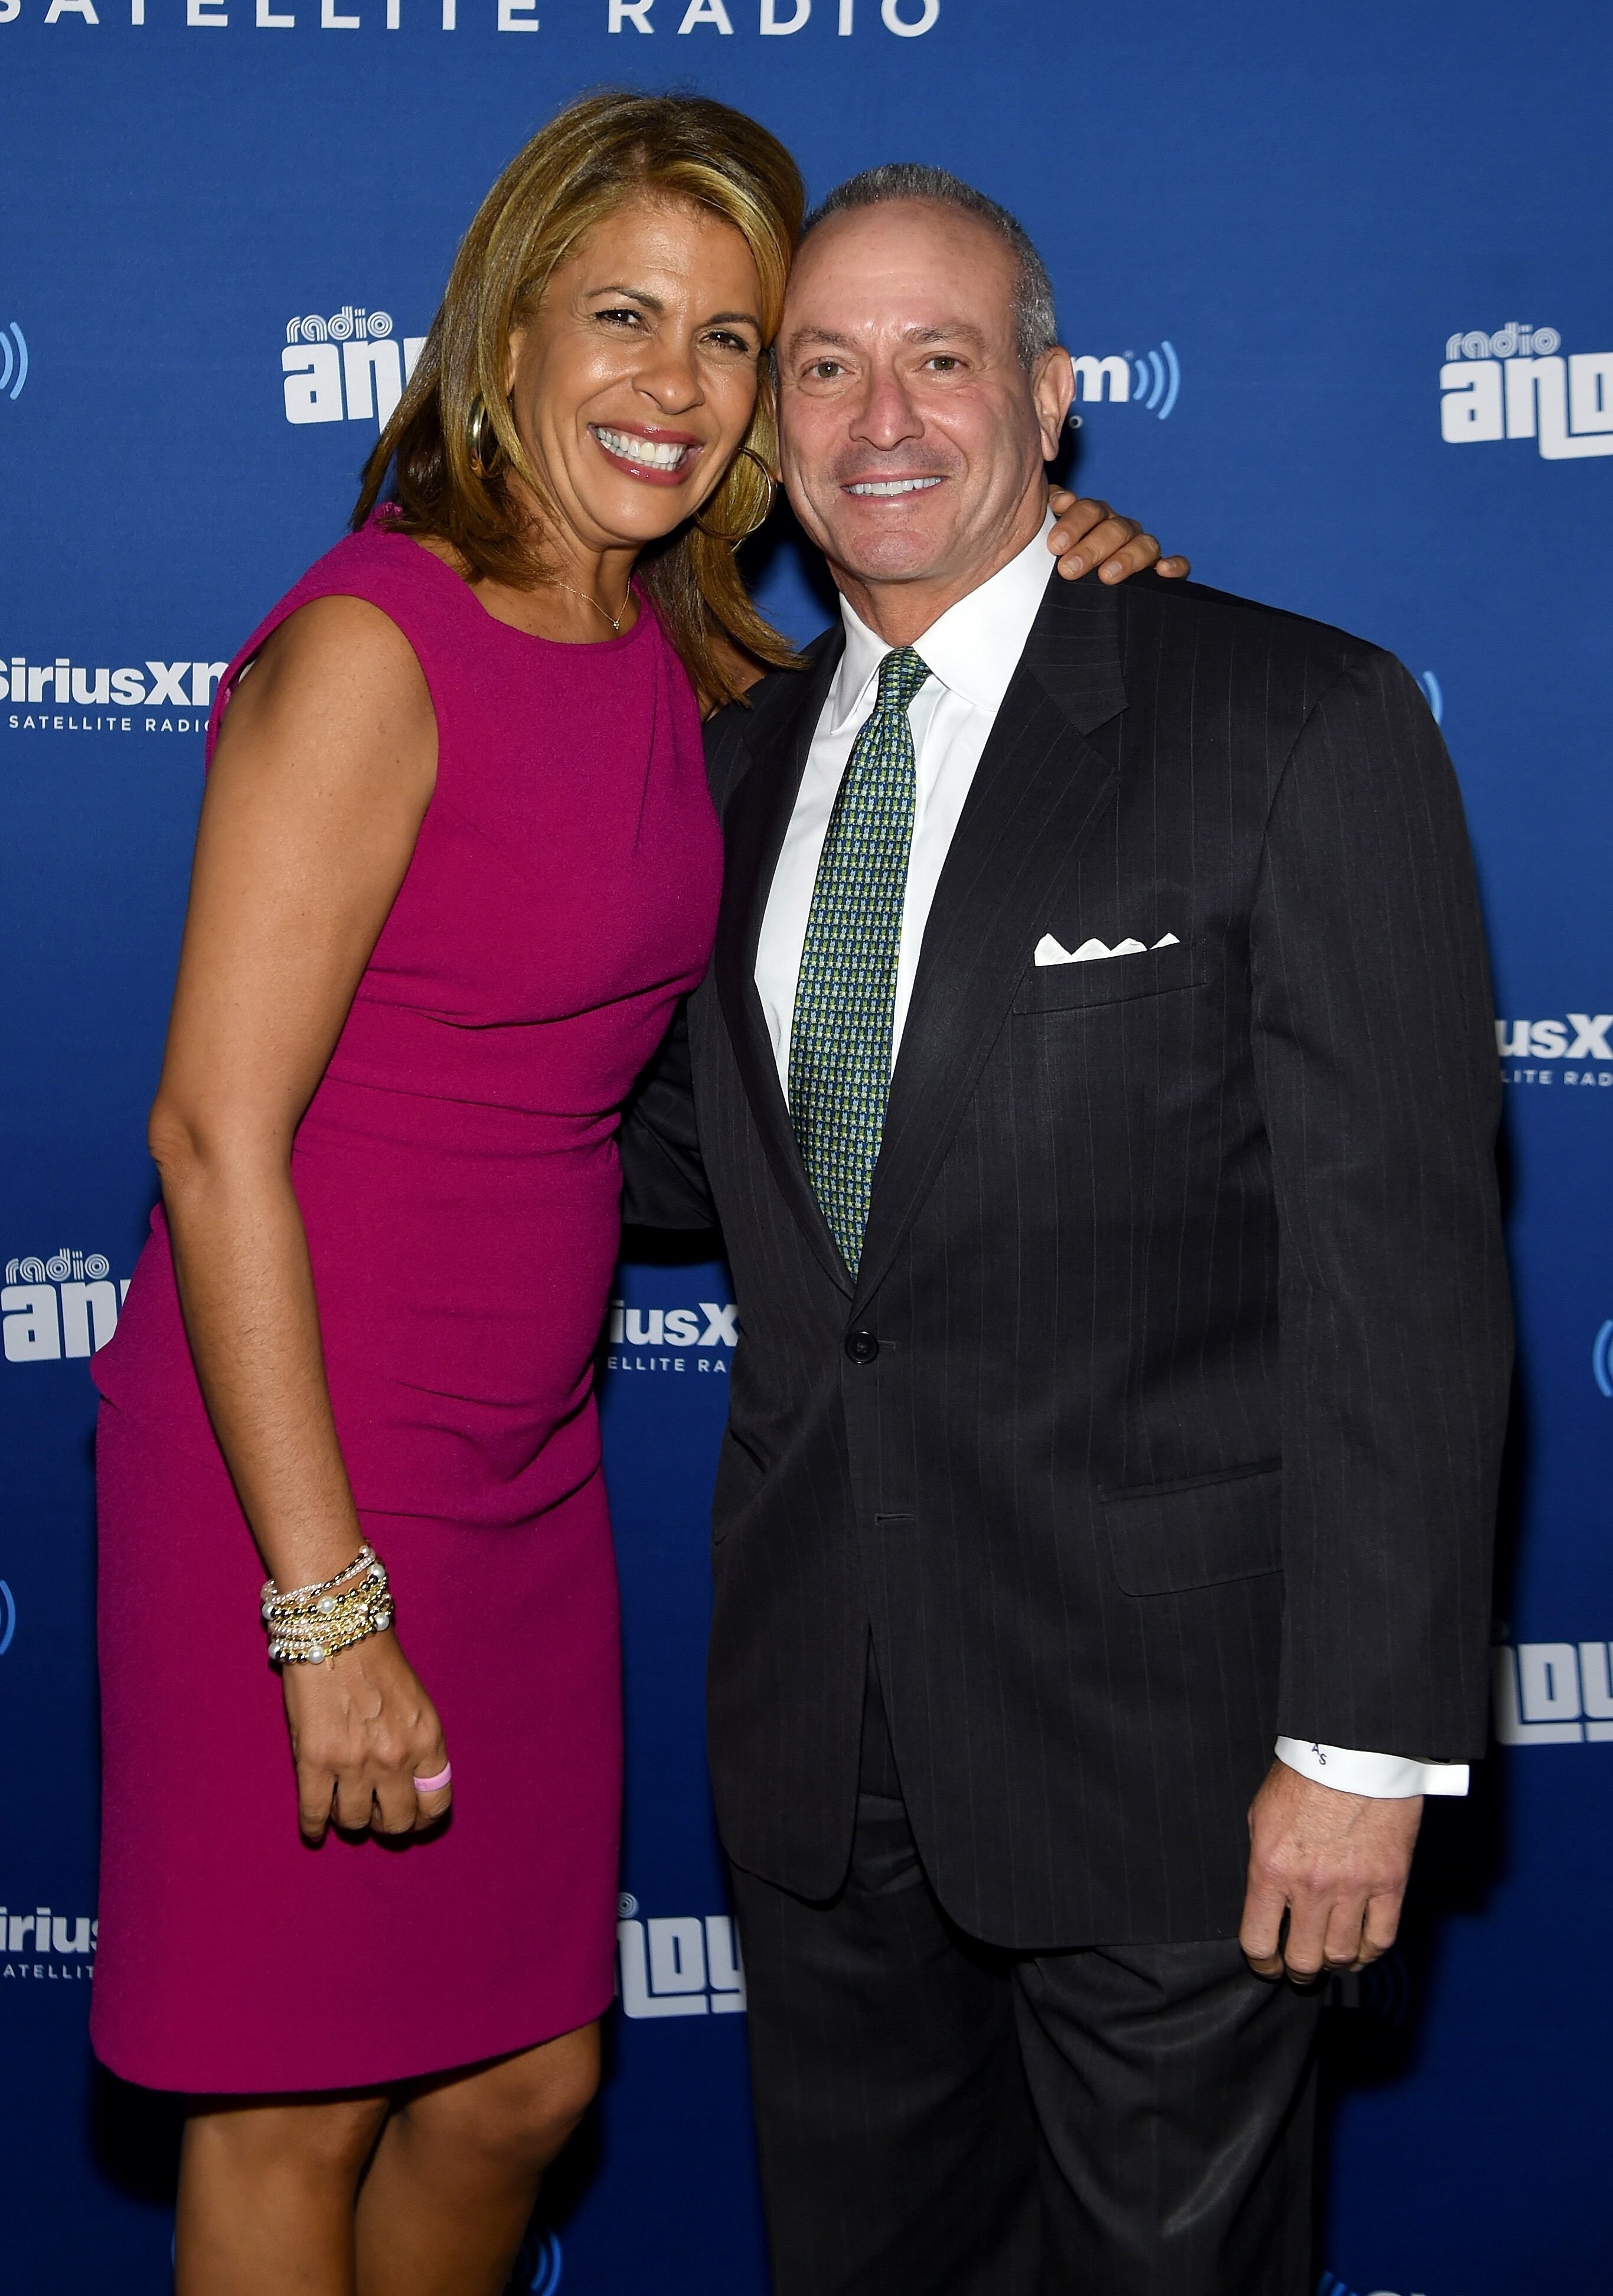 Hoda Kotb and Joel Schiffman at the new SiriusXM Channel launch on October 22, 2015. | Photo: Getty Images